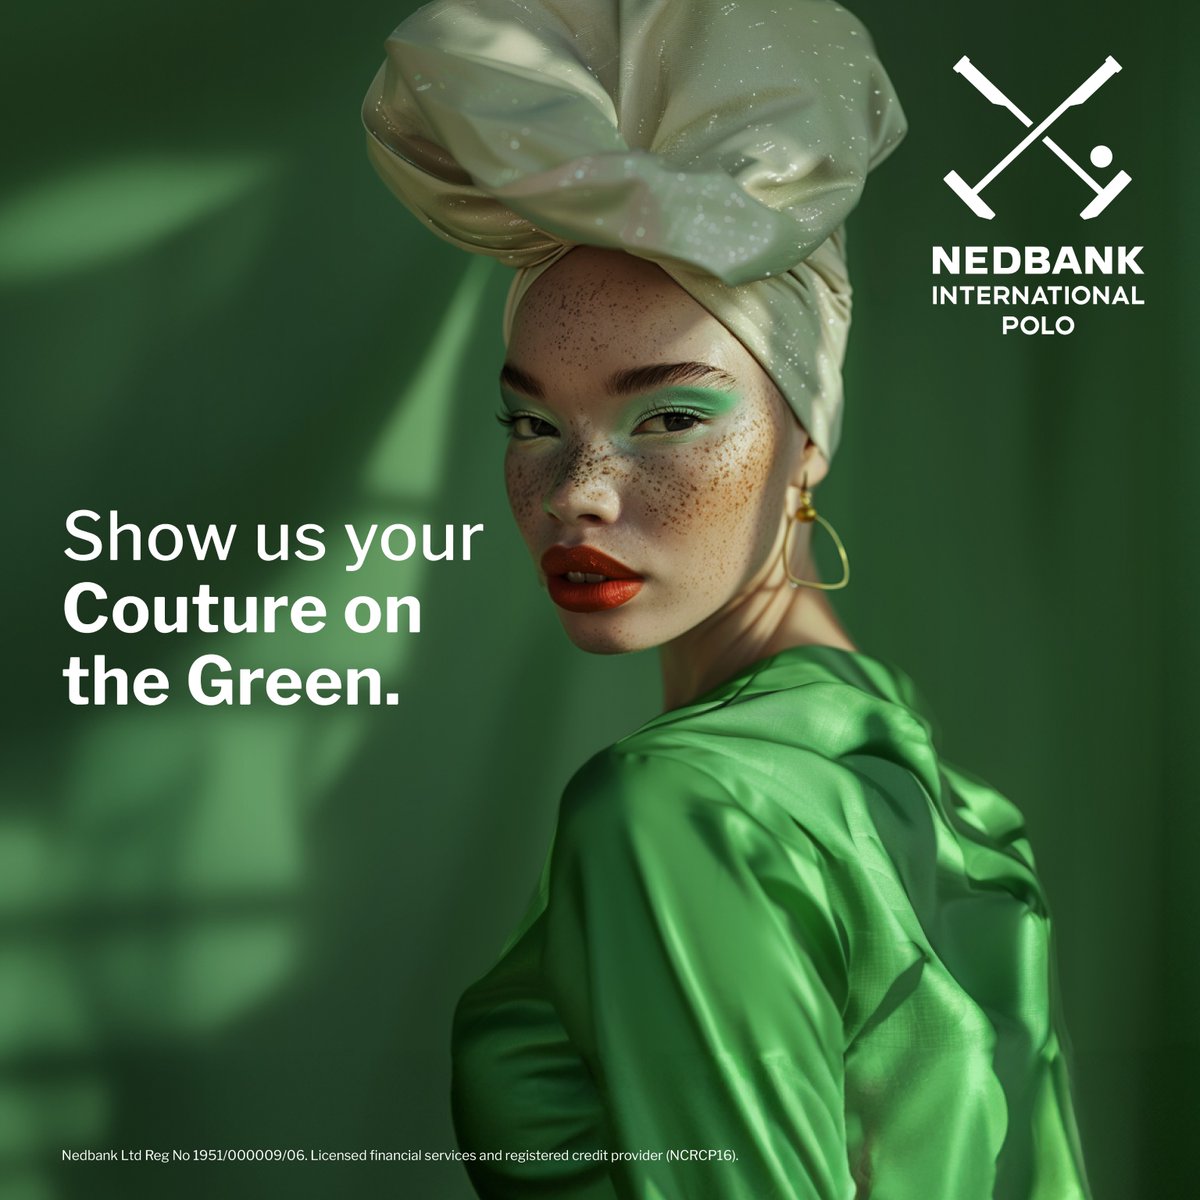 The @NedbankIntlPolo dress code is Couture on the Green, there are many ways to wear it. ⁣What outfit would you wear for this theme? ⁣ Comment with a photo of your Couture on the Green outfit using #NedbankPolo and stand a chance to win 2 general access tickets. ⁣ T&Cs apply.